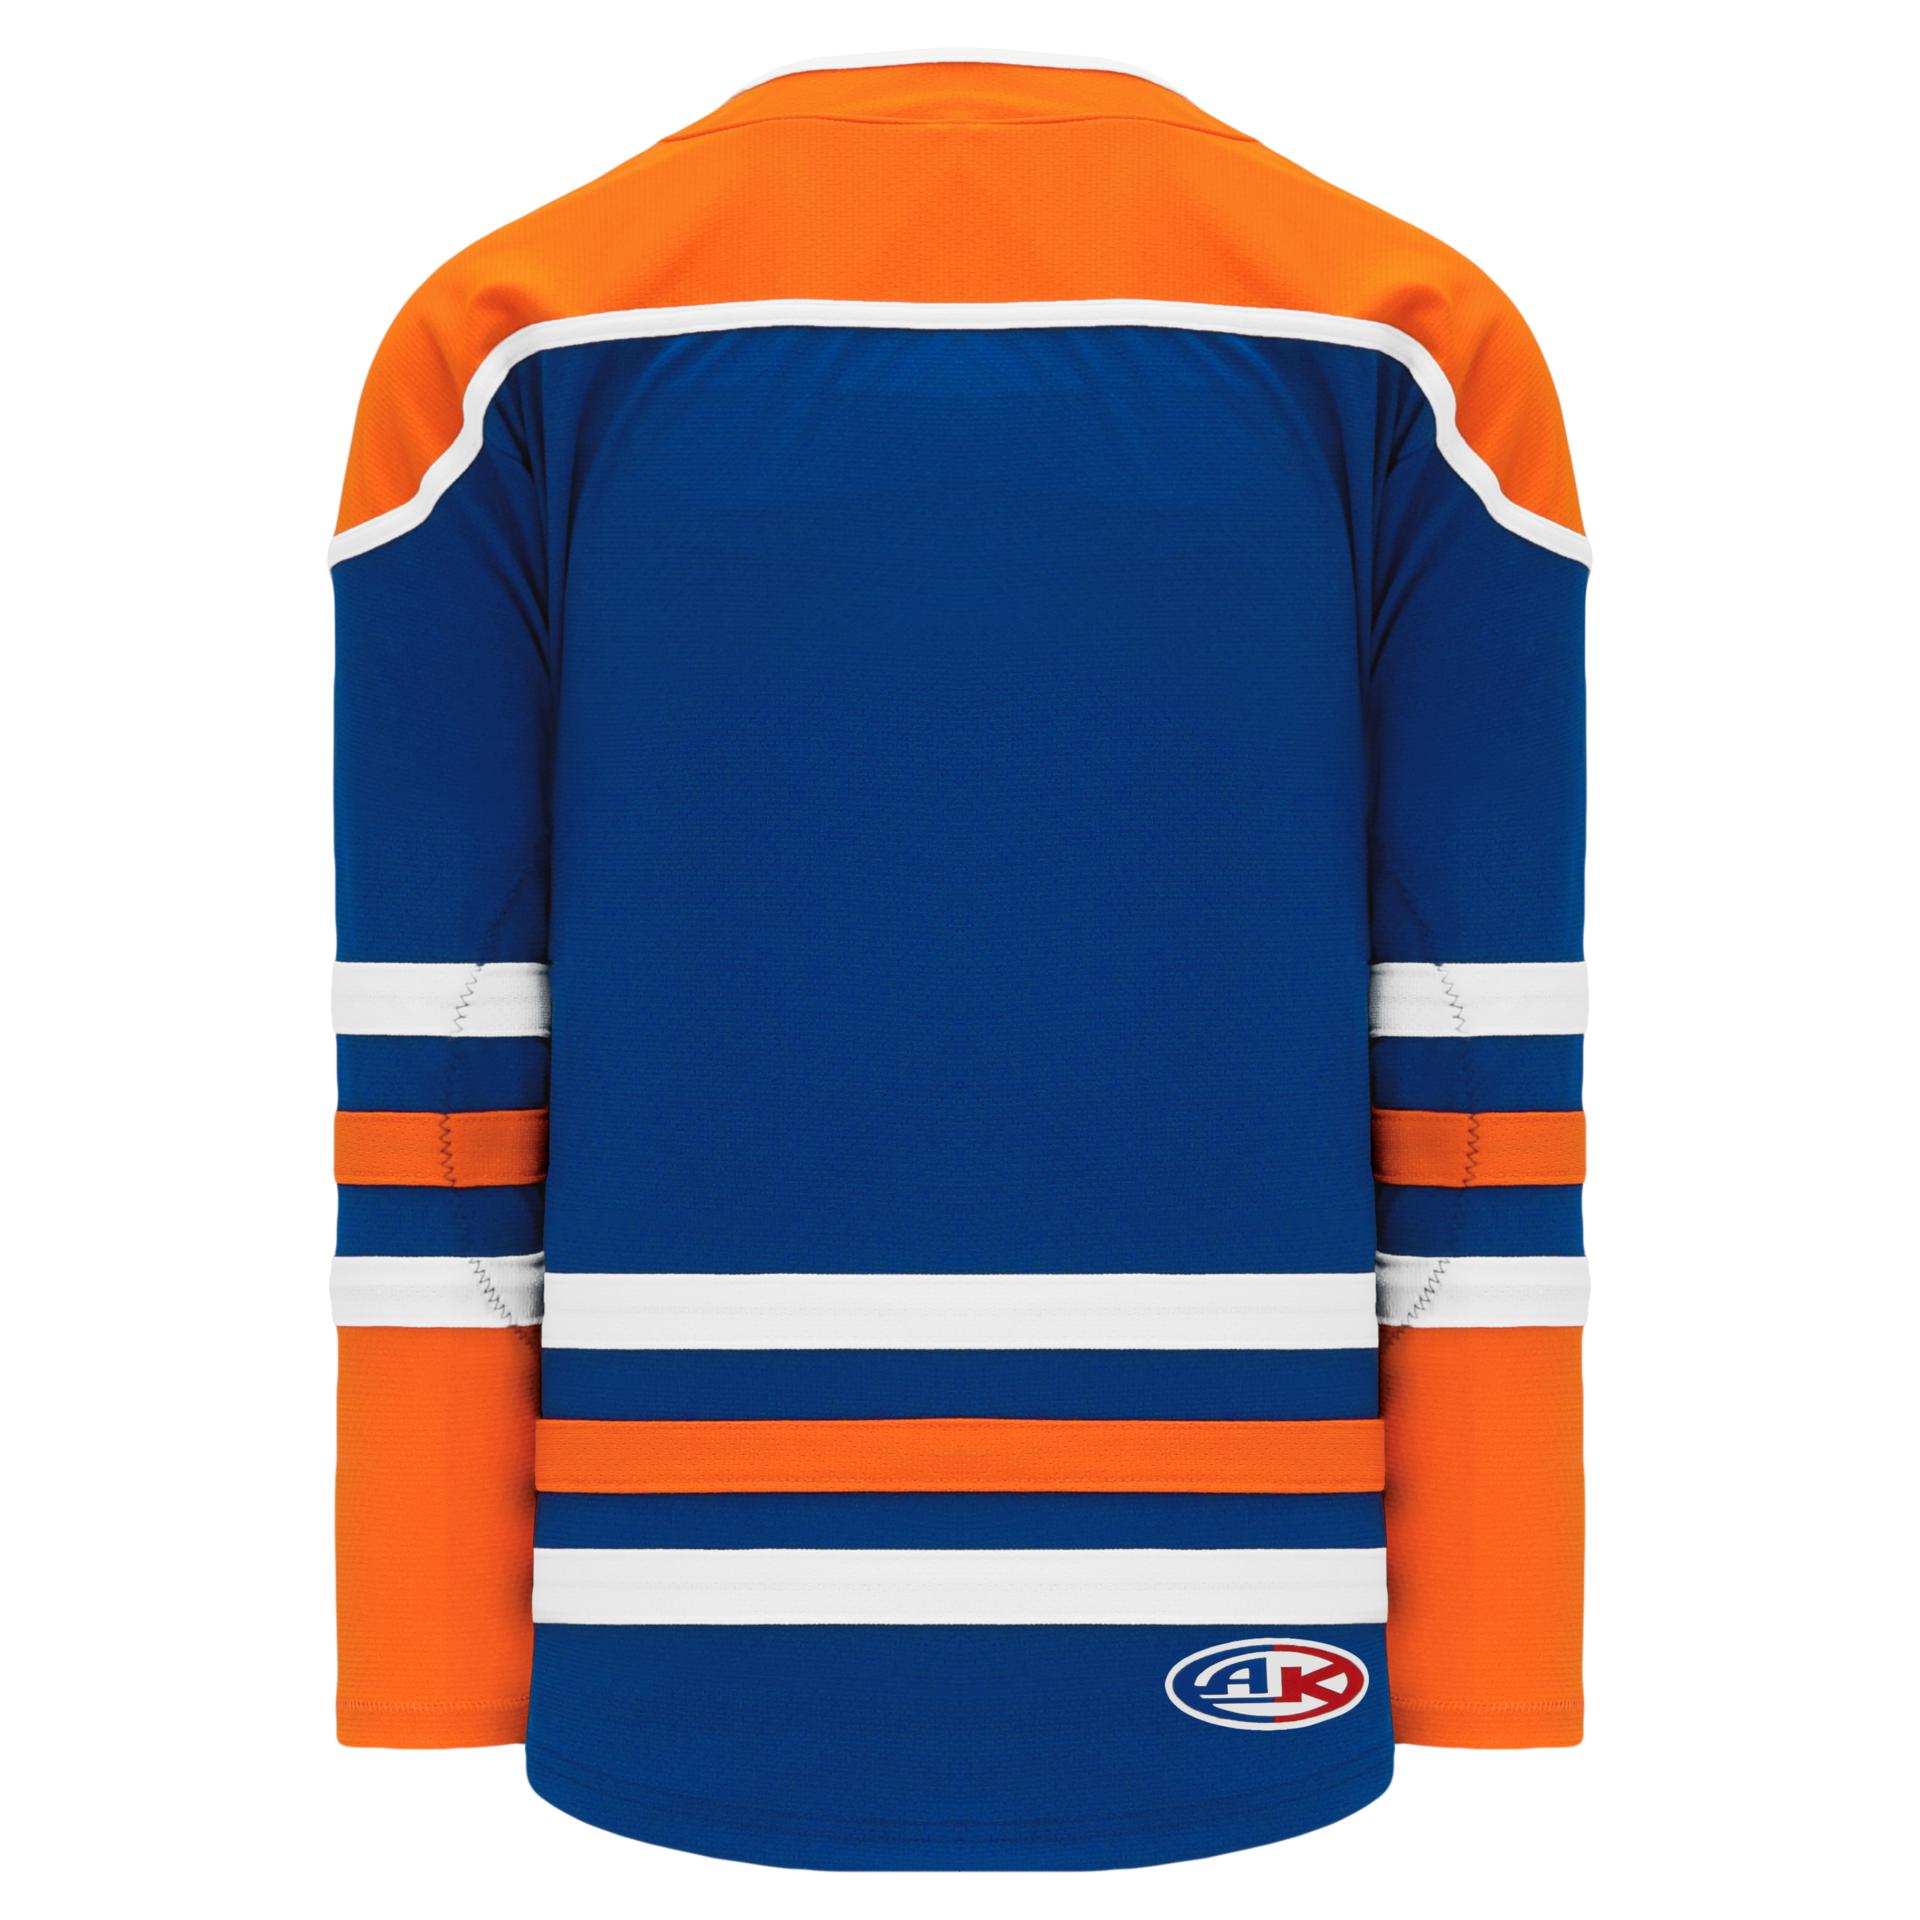 Youth Edmonton Oilers Jerseys and Apparel - Oilers Shop